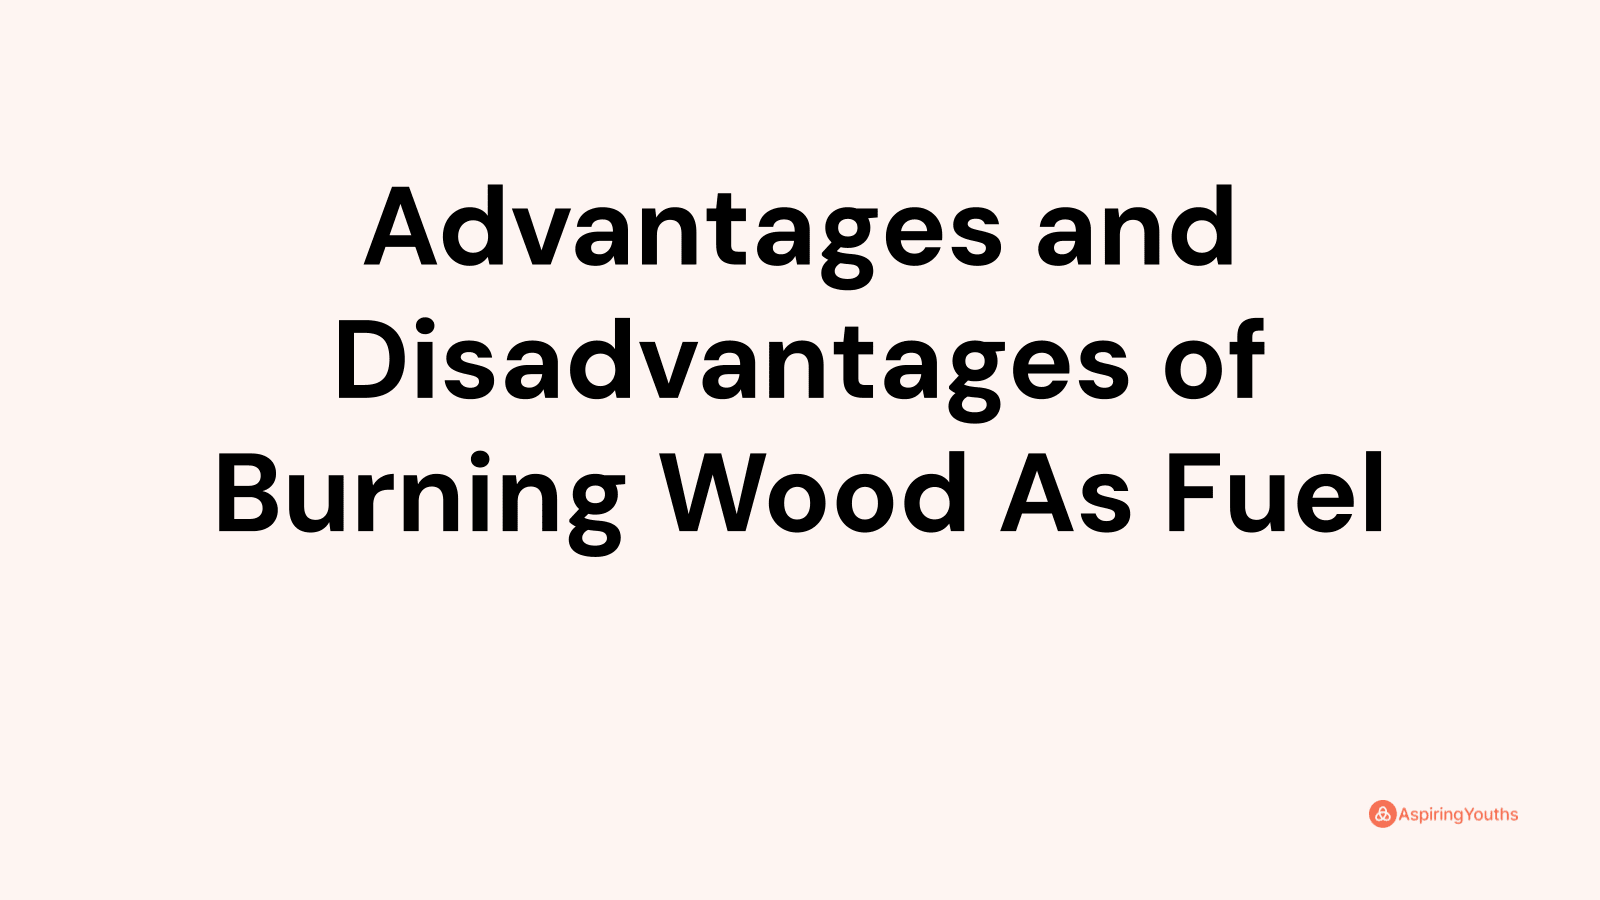 Advantages and disadvantages of Burning Wood As Fuel